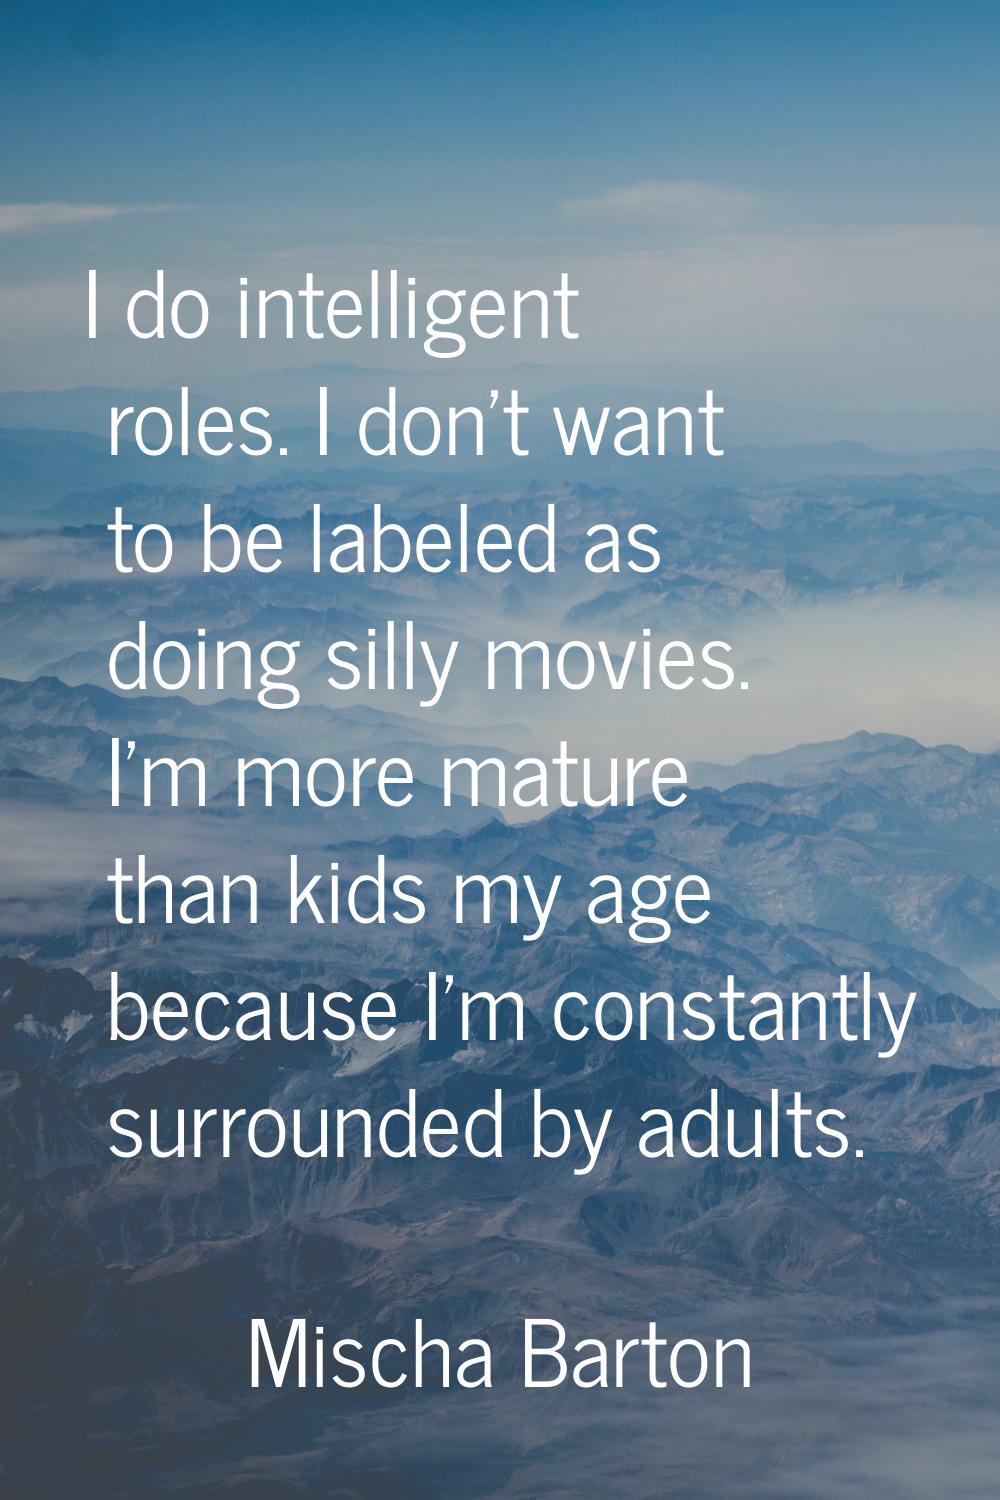 I do intelligent roles. I don't want to be labeled as doing silly movies. I'm more mature than kids